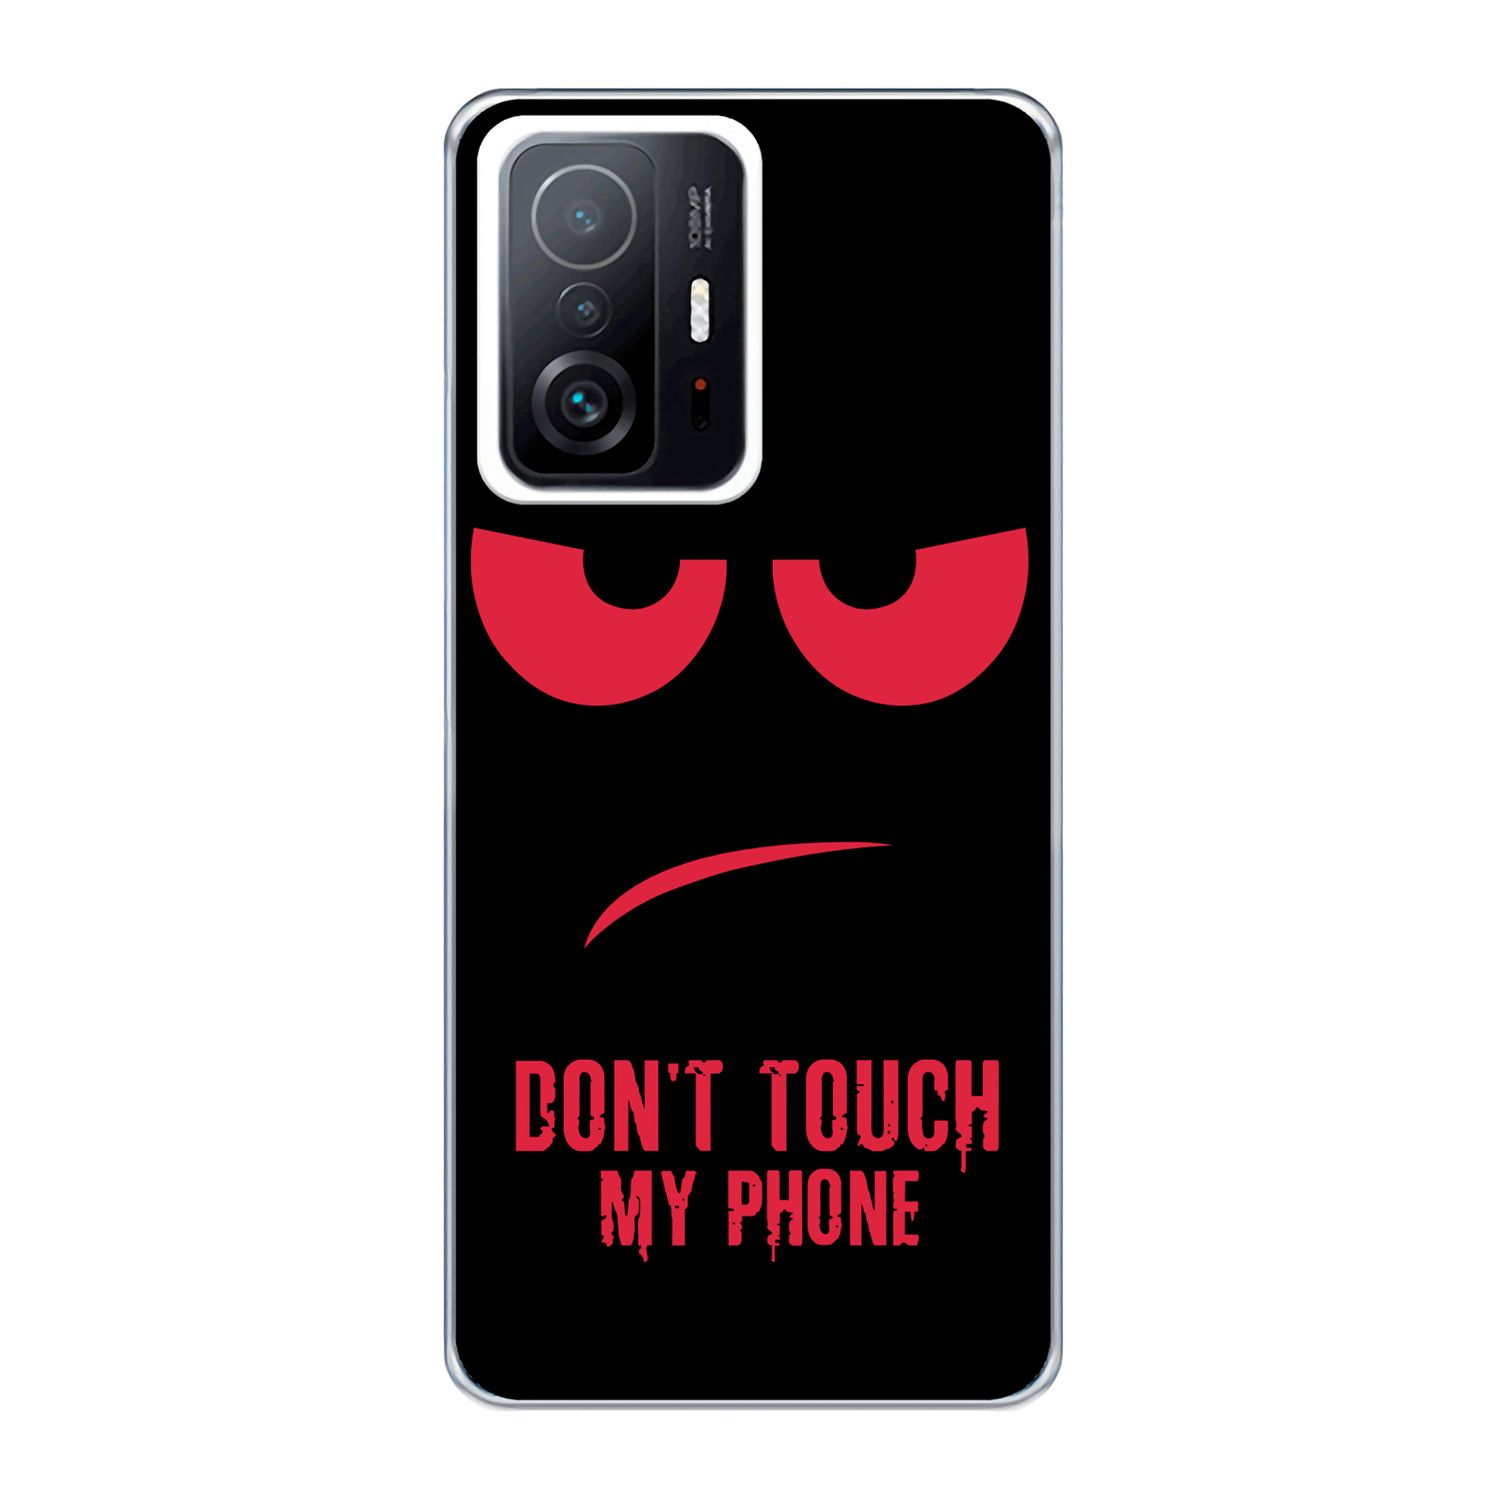 Mi Backcover, 11T 11T Rot Pro, DESIGN KÖNIG My Xiaomi, Case, Phone Dont / Touch